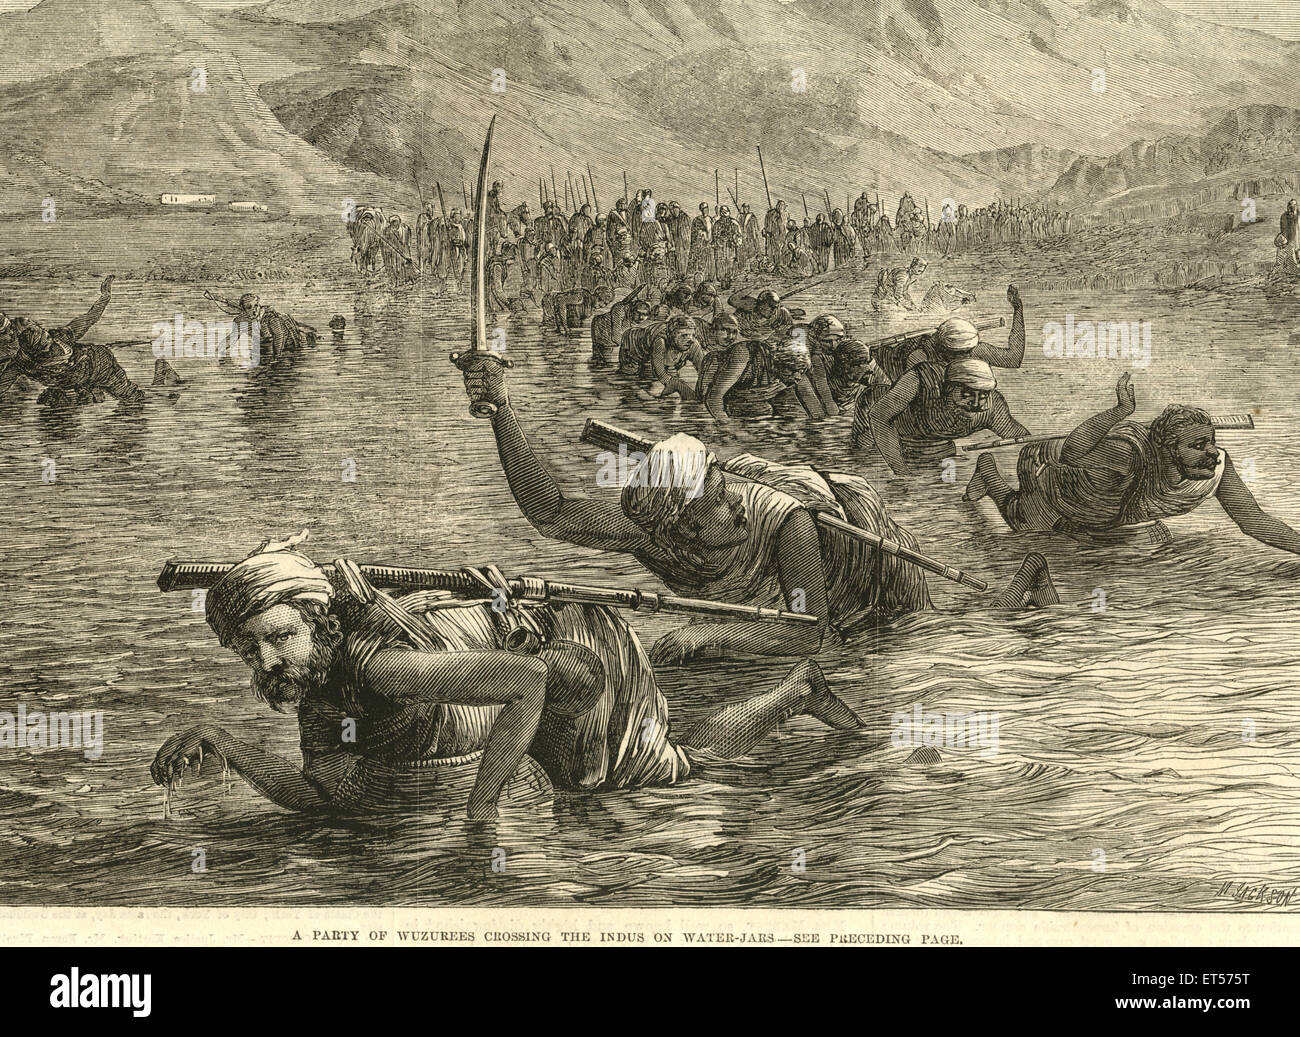 A party of Wuzurees crossing the Indus on water jars ; India Stock Photo